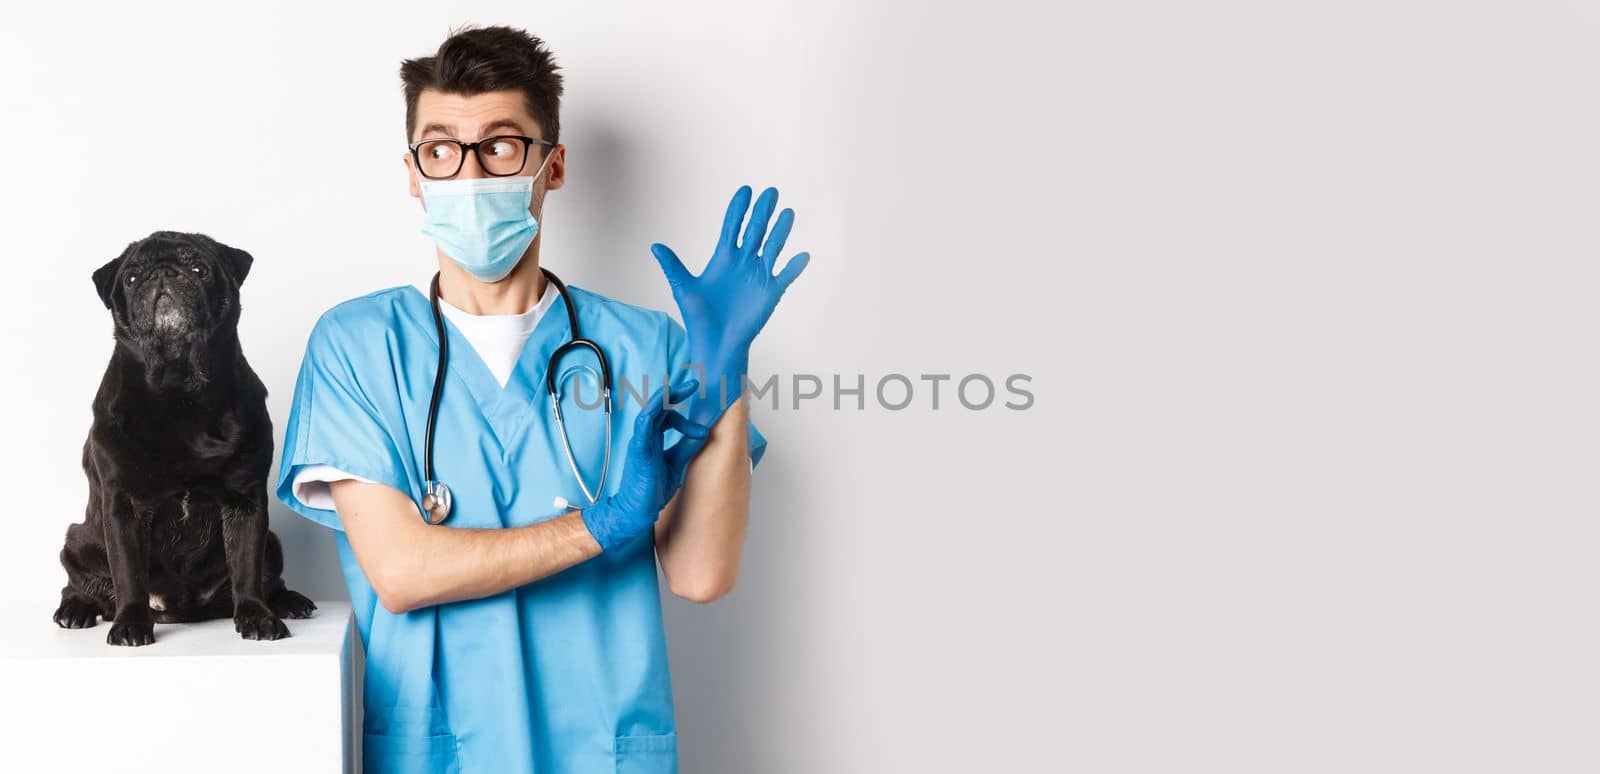 Cheerful doctor veterinarian wearing rubber gloves and medical mask, examining cute black pug dog, standing over white background by Benzoix